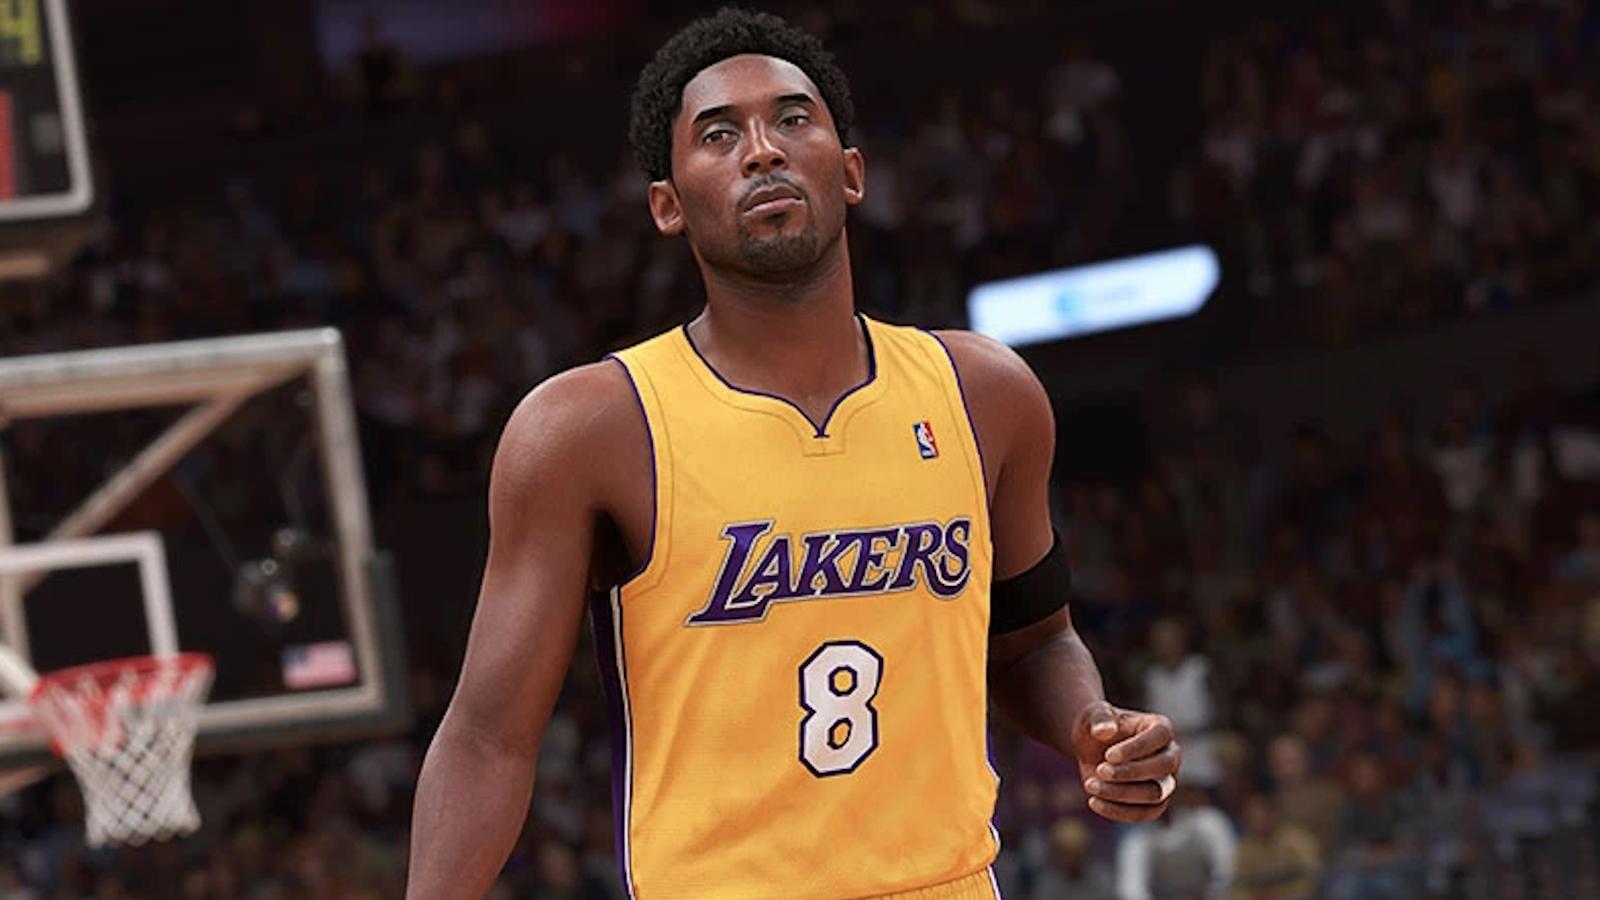 The latest NBA 2K game always gets a huge Steam discount in May